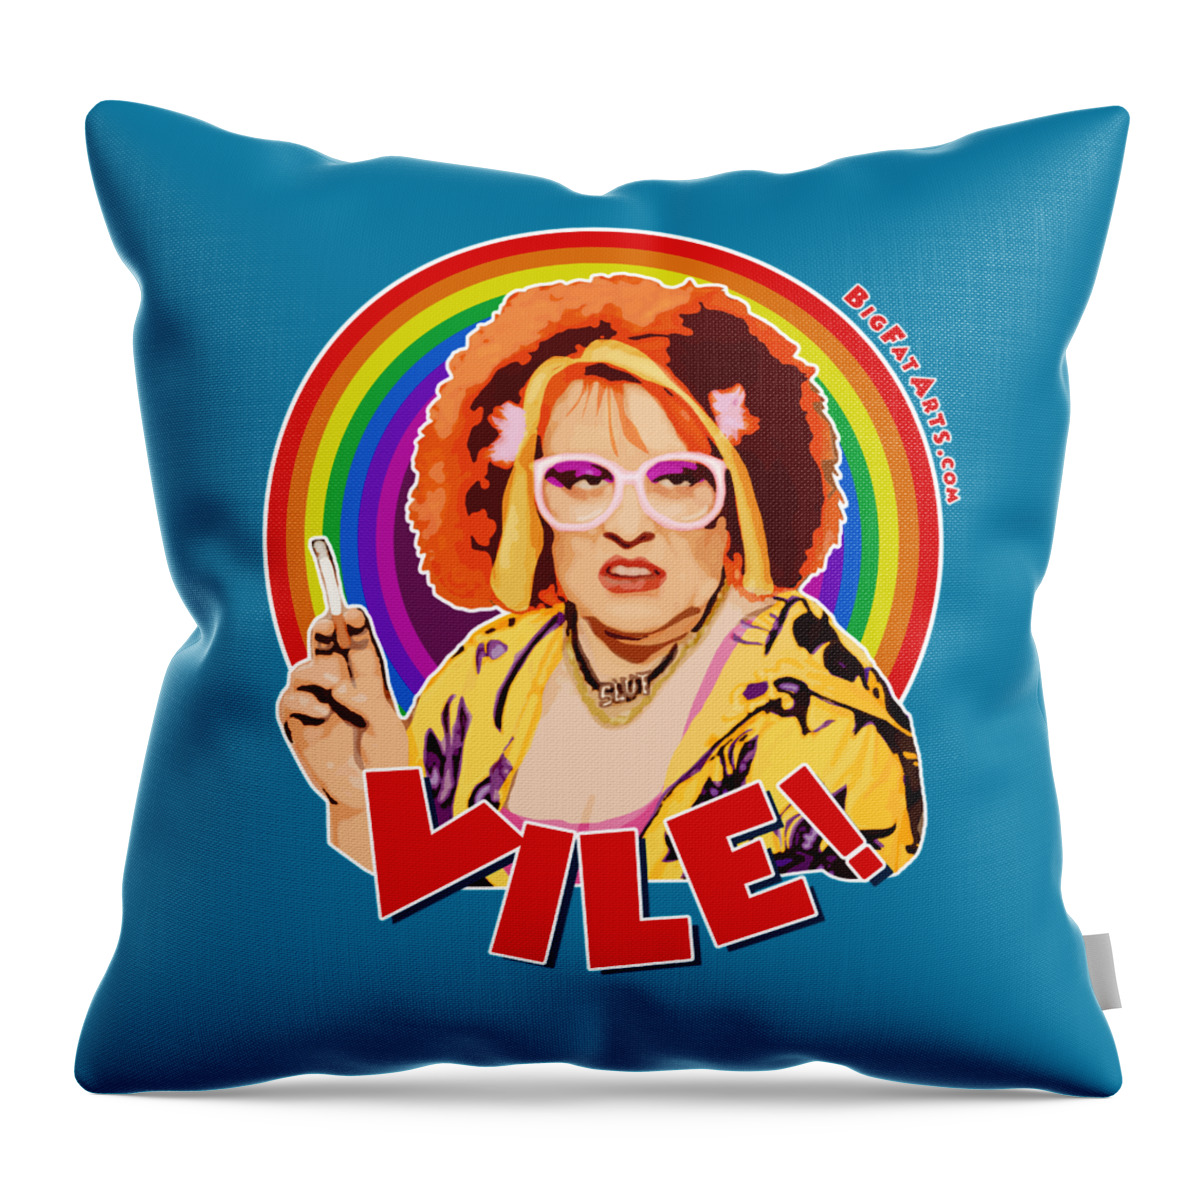 Auburn Jerry Hall Kathy Burke Gimme Gimme Gimme Vile Pussy Person Laziness Vile Throw Pillow featuring the digital art Gimme Gimme Gimme - Vile by Big Fat Arts